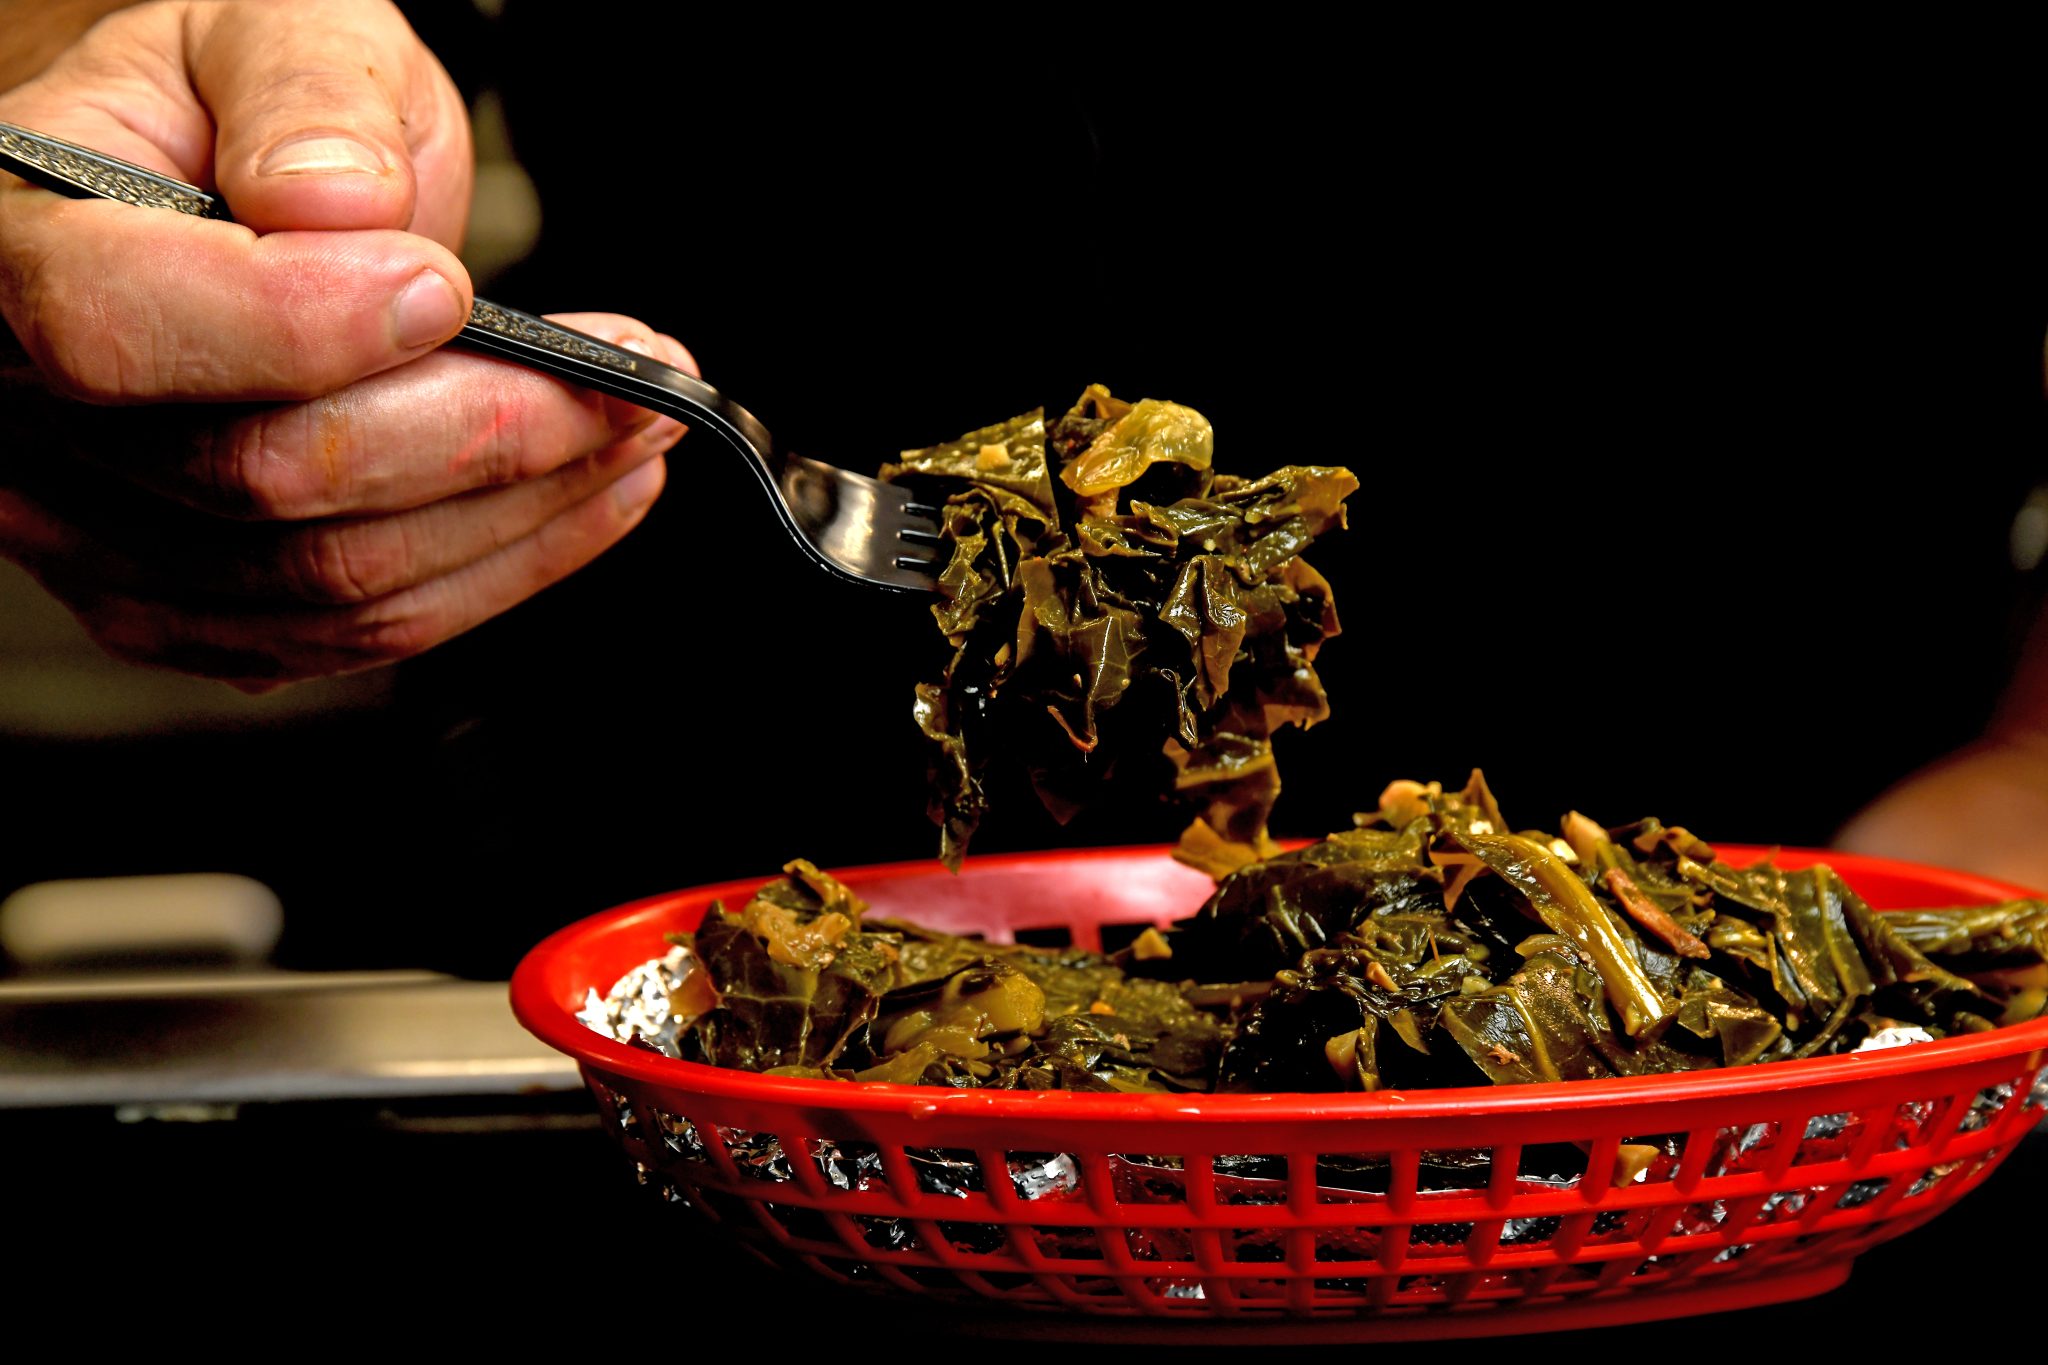 Greens dish in red basket being raised by black plastic fork in hand